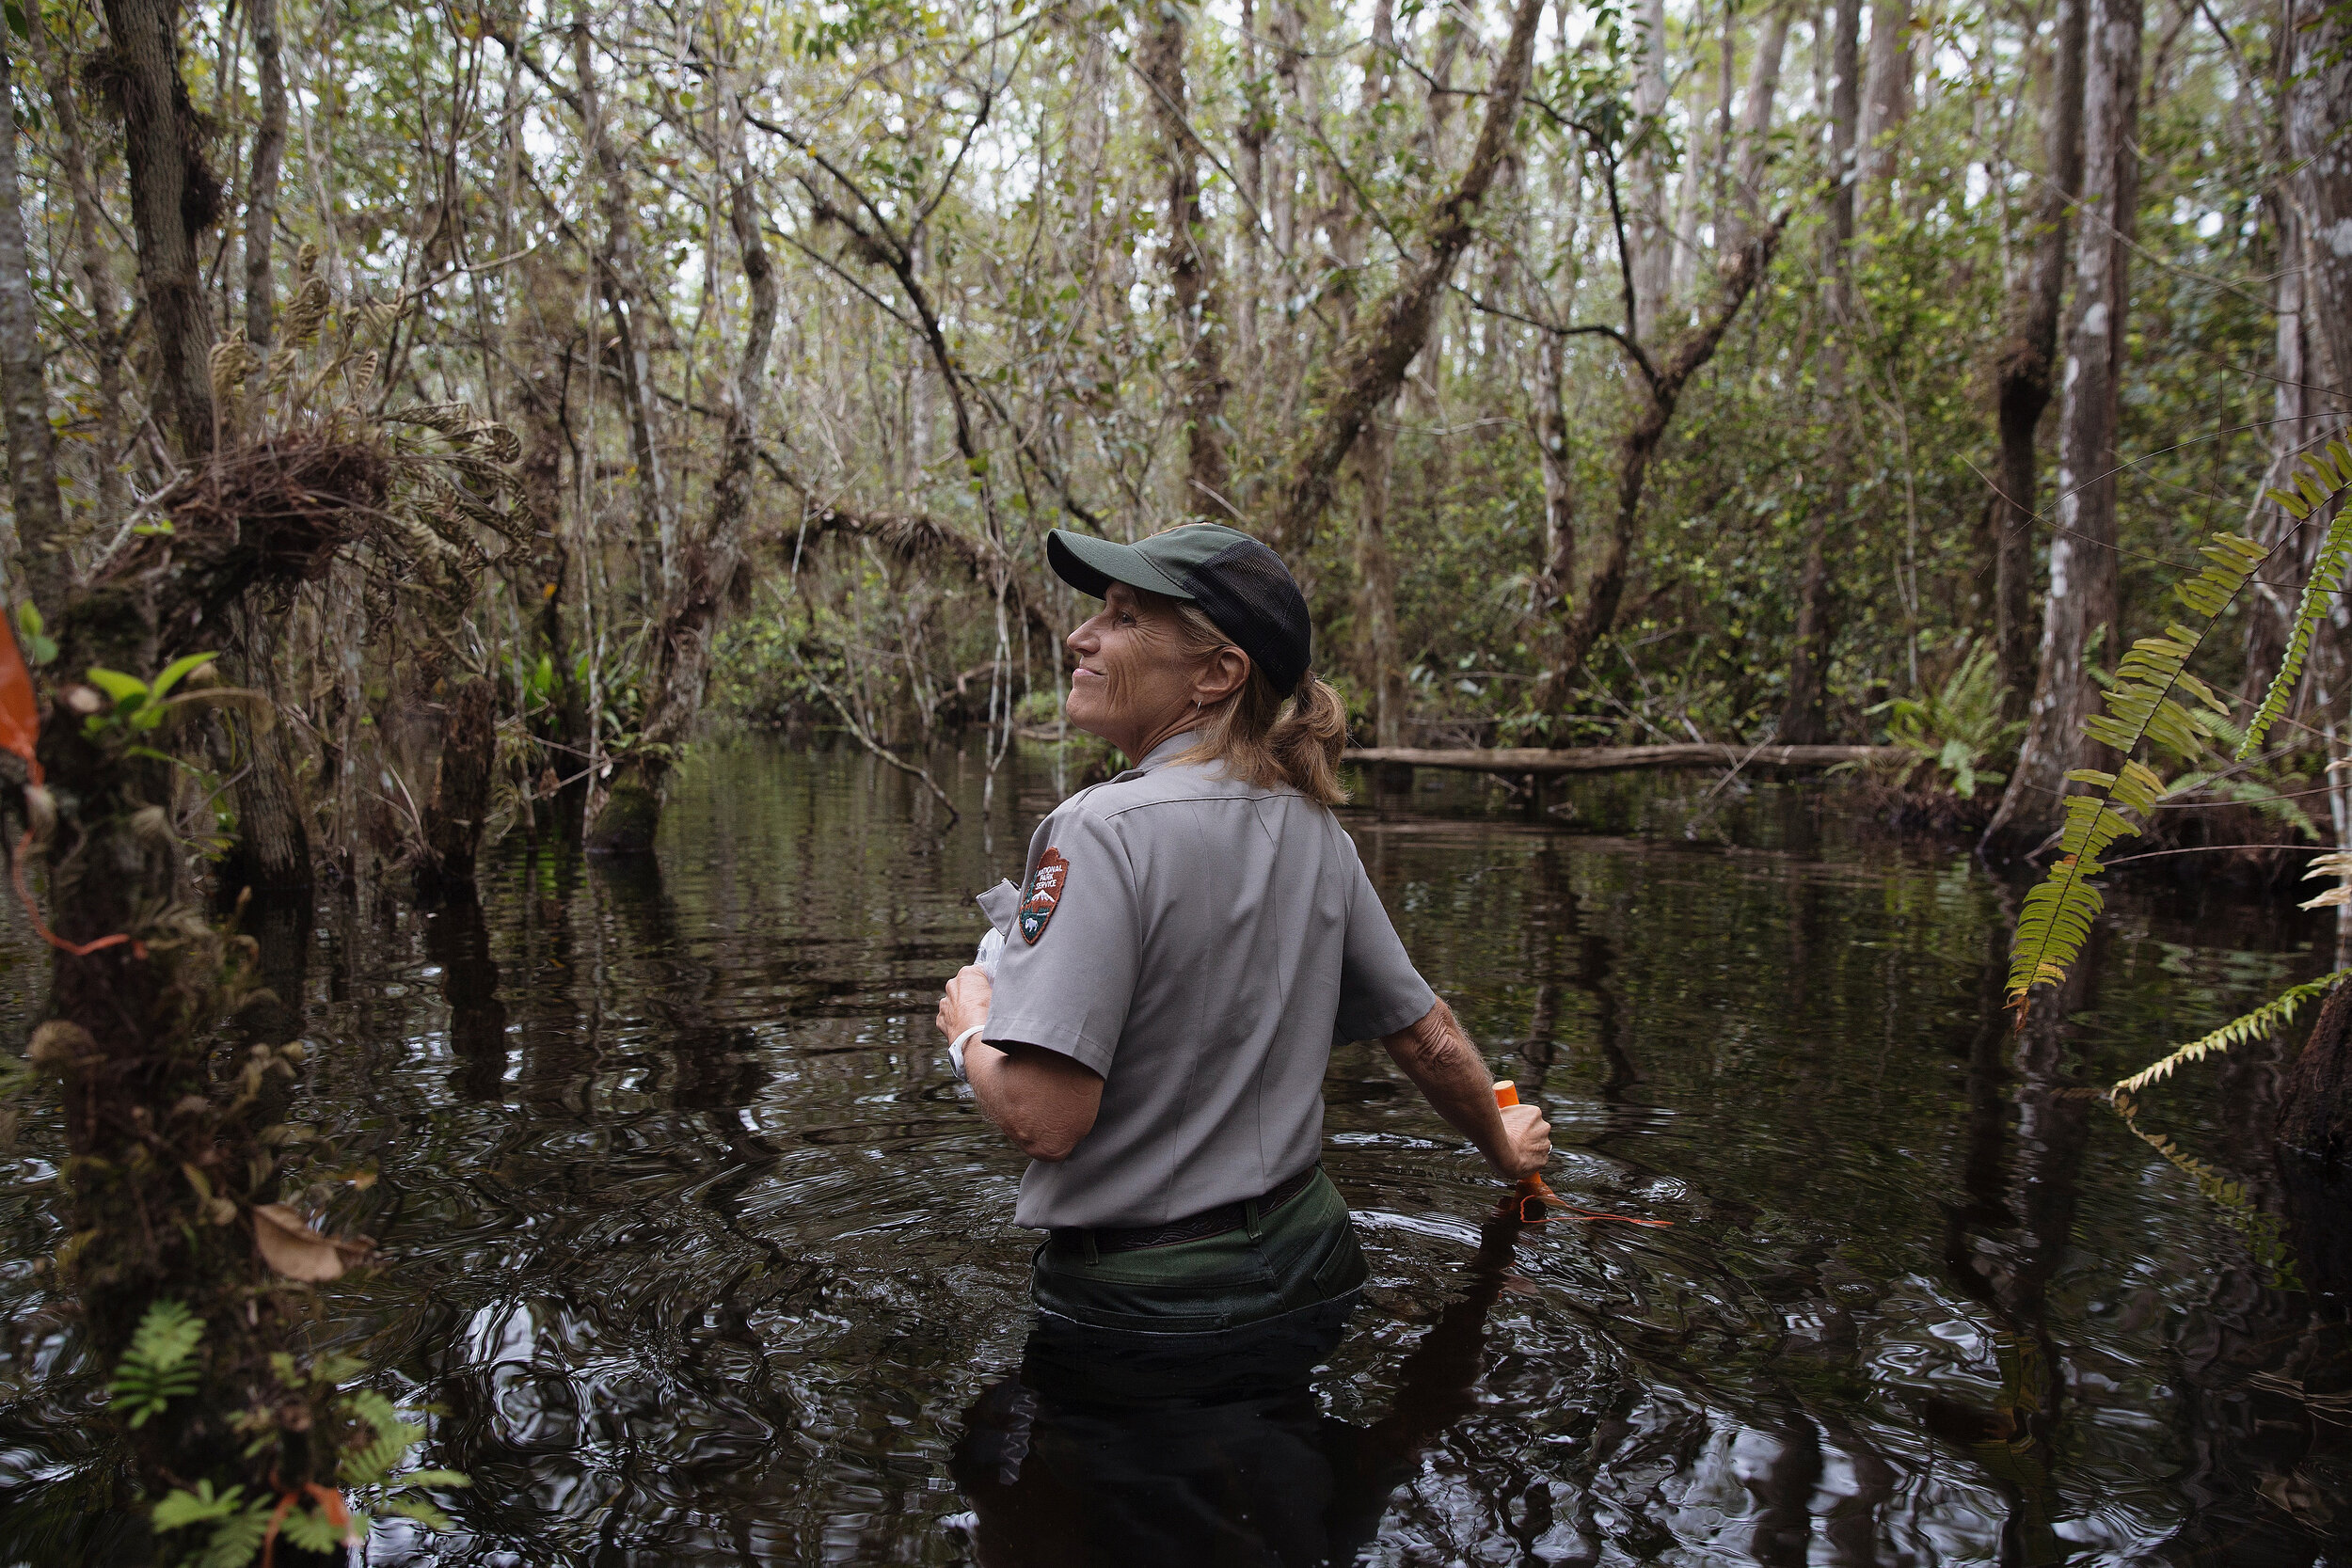  Lisa Andrews, an outreach and education coordinator for Big Cypress National Reserve, guides Christopher Richard, his wife Alyssa St. Claire and their daughter Casey on a swamp walk through the land behind Clyde Butcher's Big Cypress Gallery on Satu